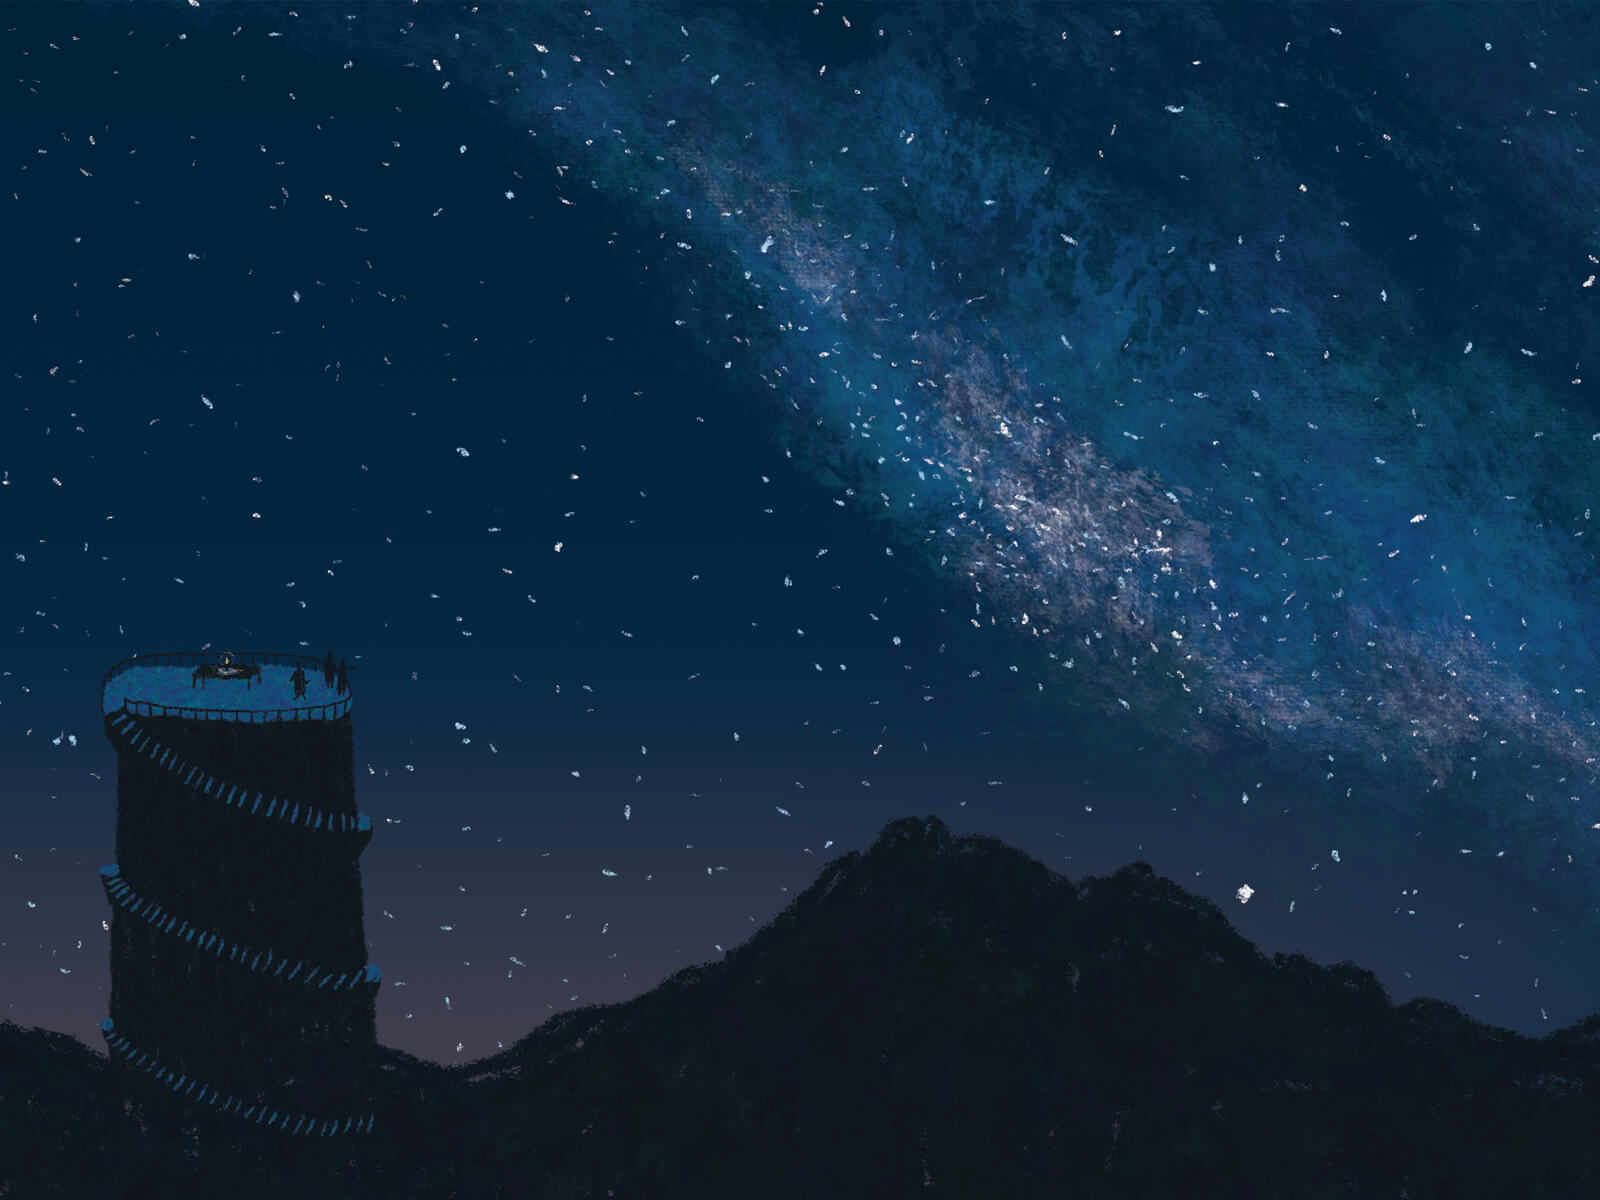 A watch tower silhouette in a night sky